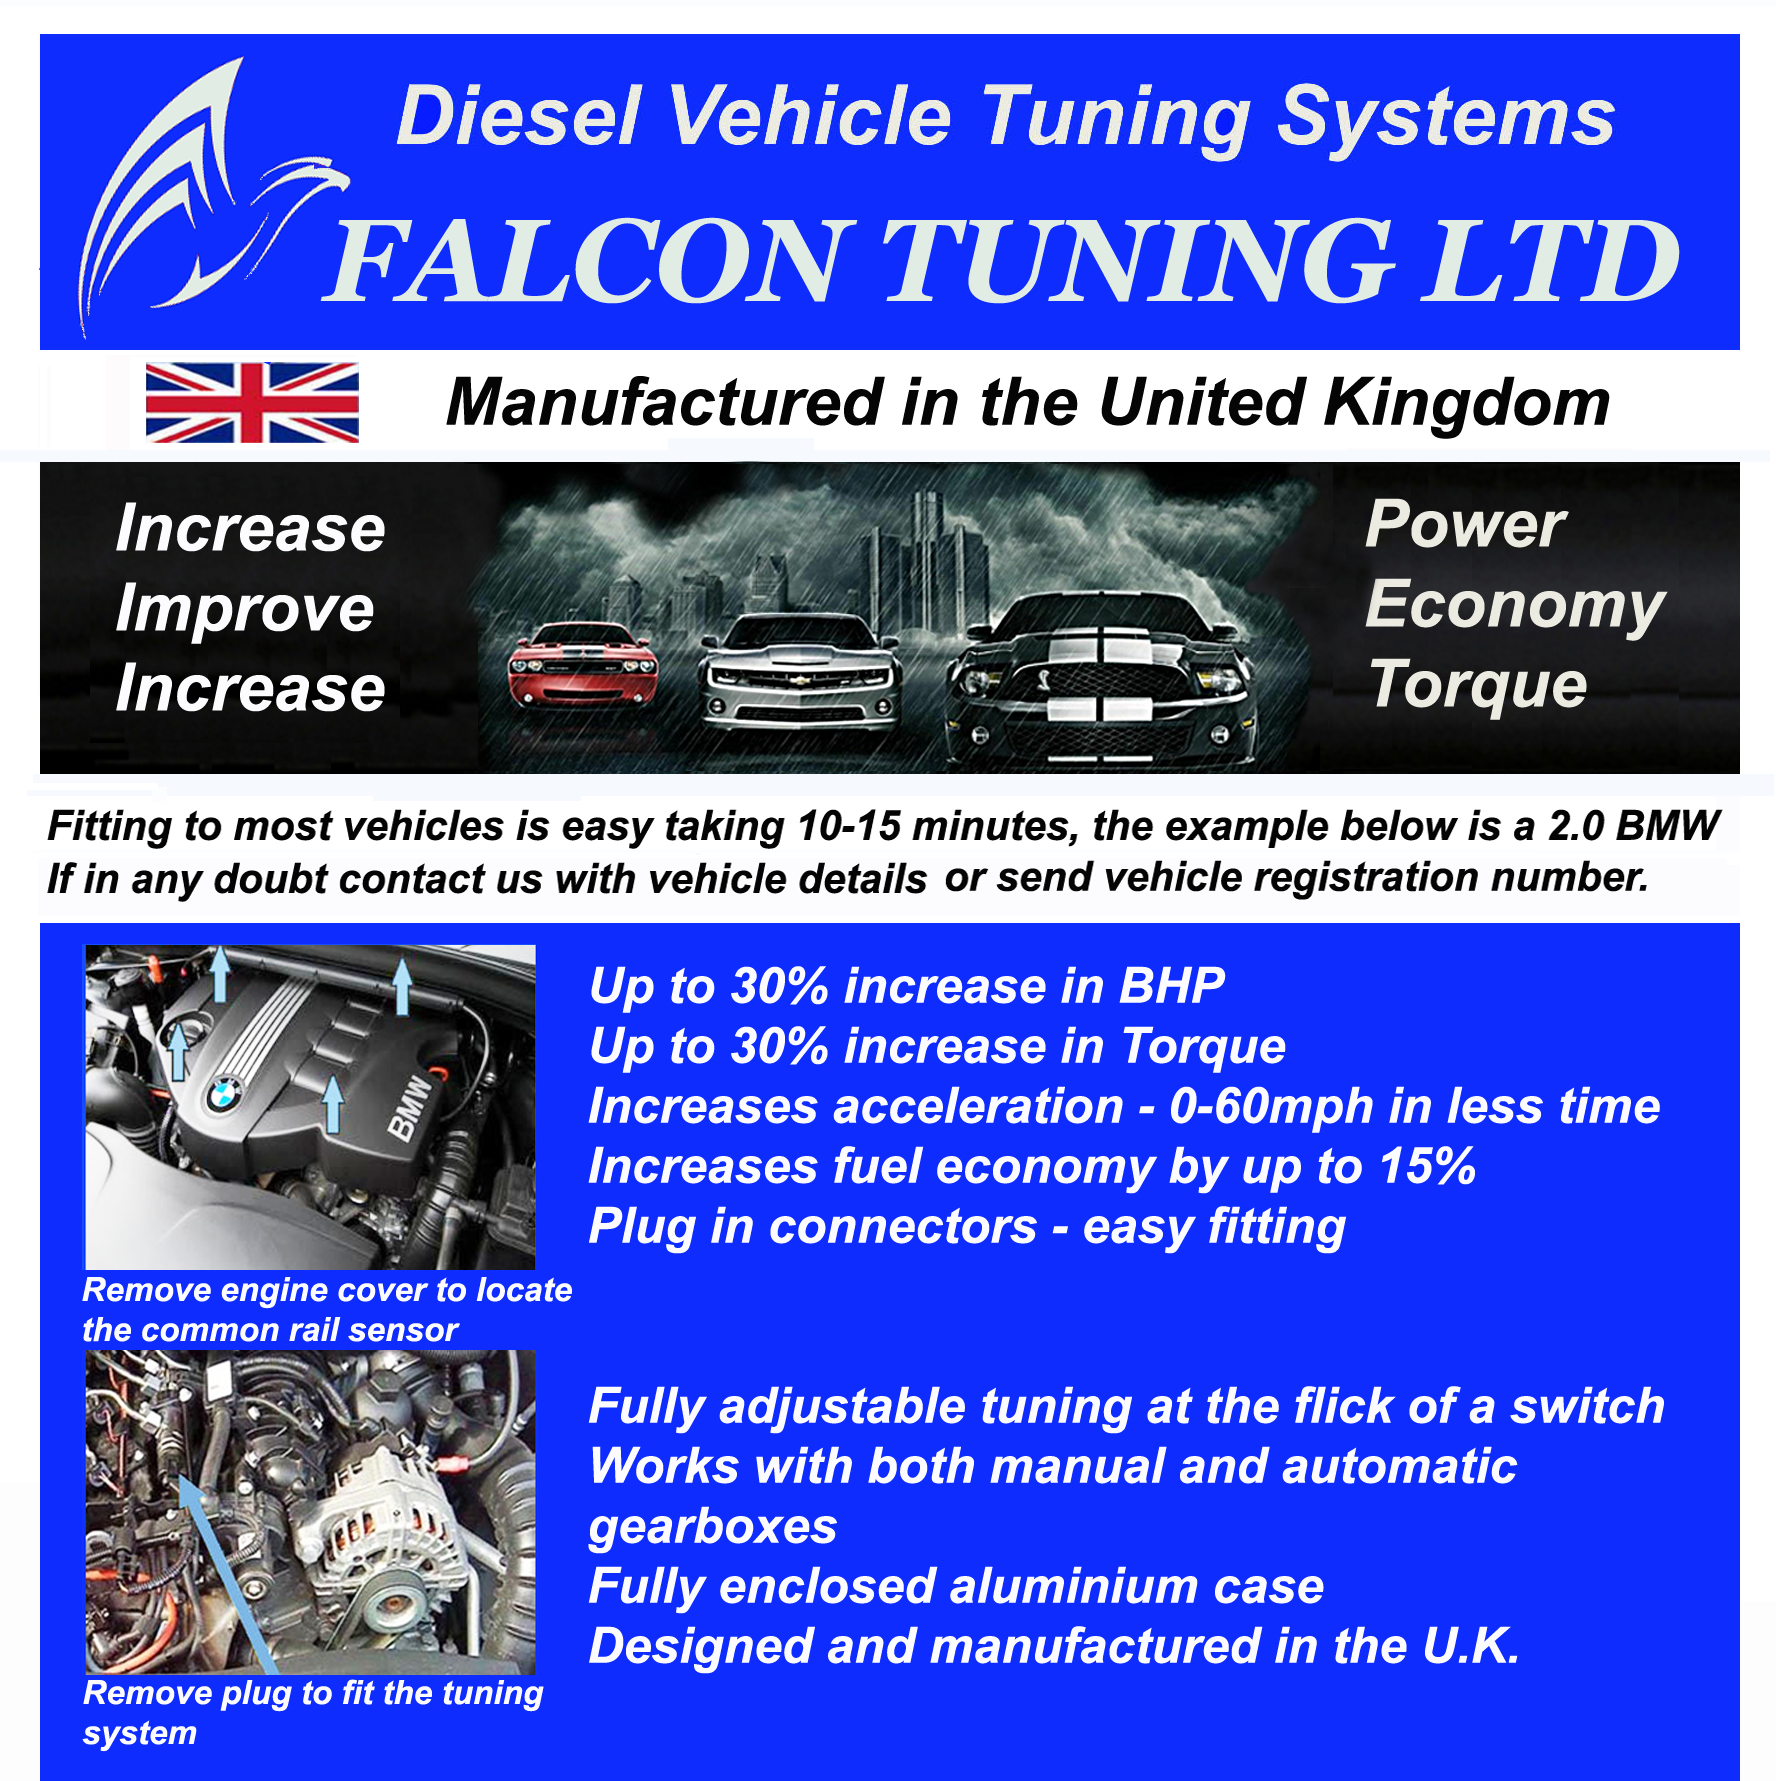 performance diesel tuning remap box increase power and save on fuel Up to 30% increase in Power and Torque
Increases acceleration - 0-60mph in less time
Increases fuel economy by up to 15%
Plug in connectors - easy fitting
Fully adjustable tuning at the flick of a switch
Works with both manual and automatic gearboxes
Fully enclosed aluminium case
Designed and manufactured in the U.K.